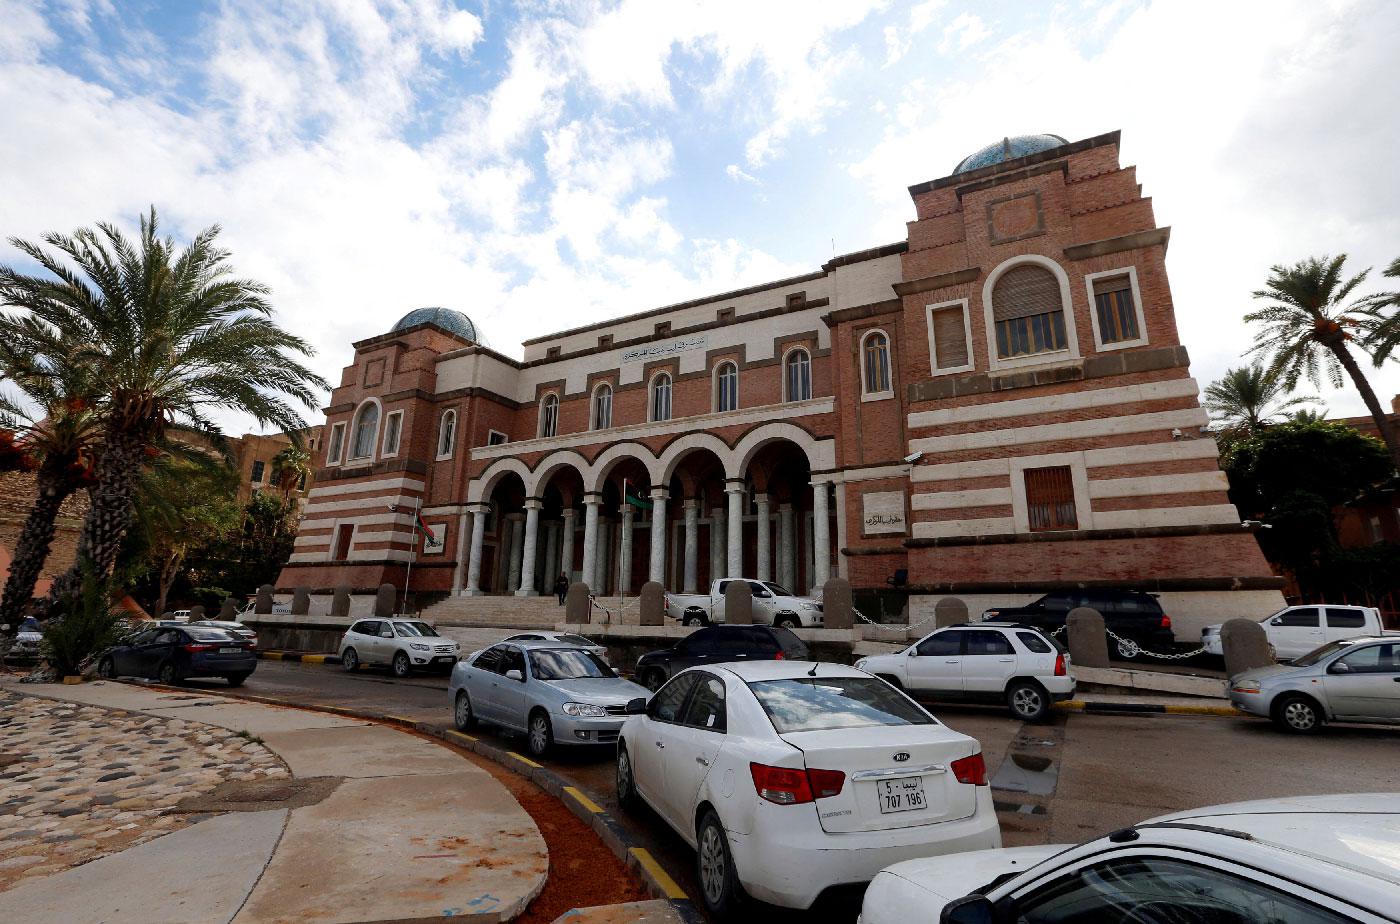 Cars are parked outside the Central Bank of Libya in Tripoli, Libya November 14, 2017.